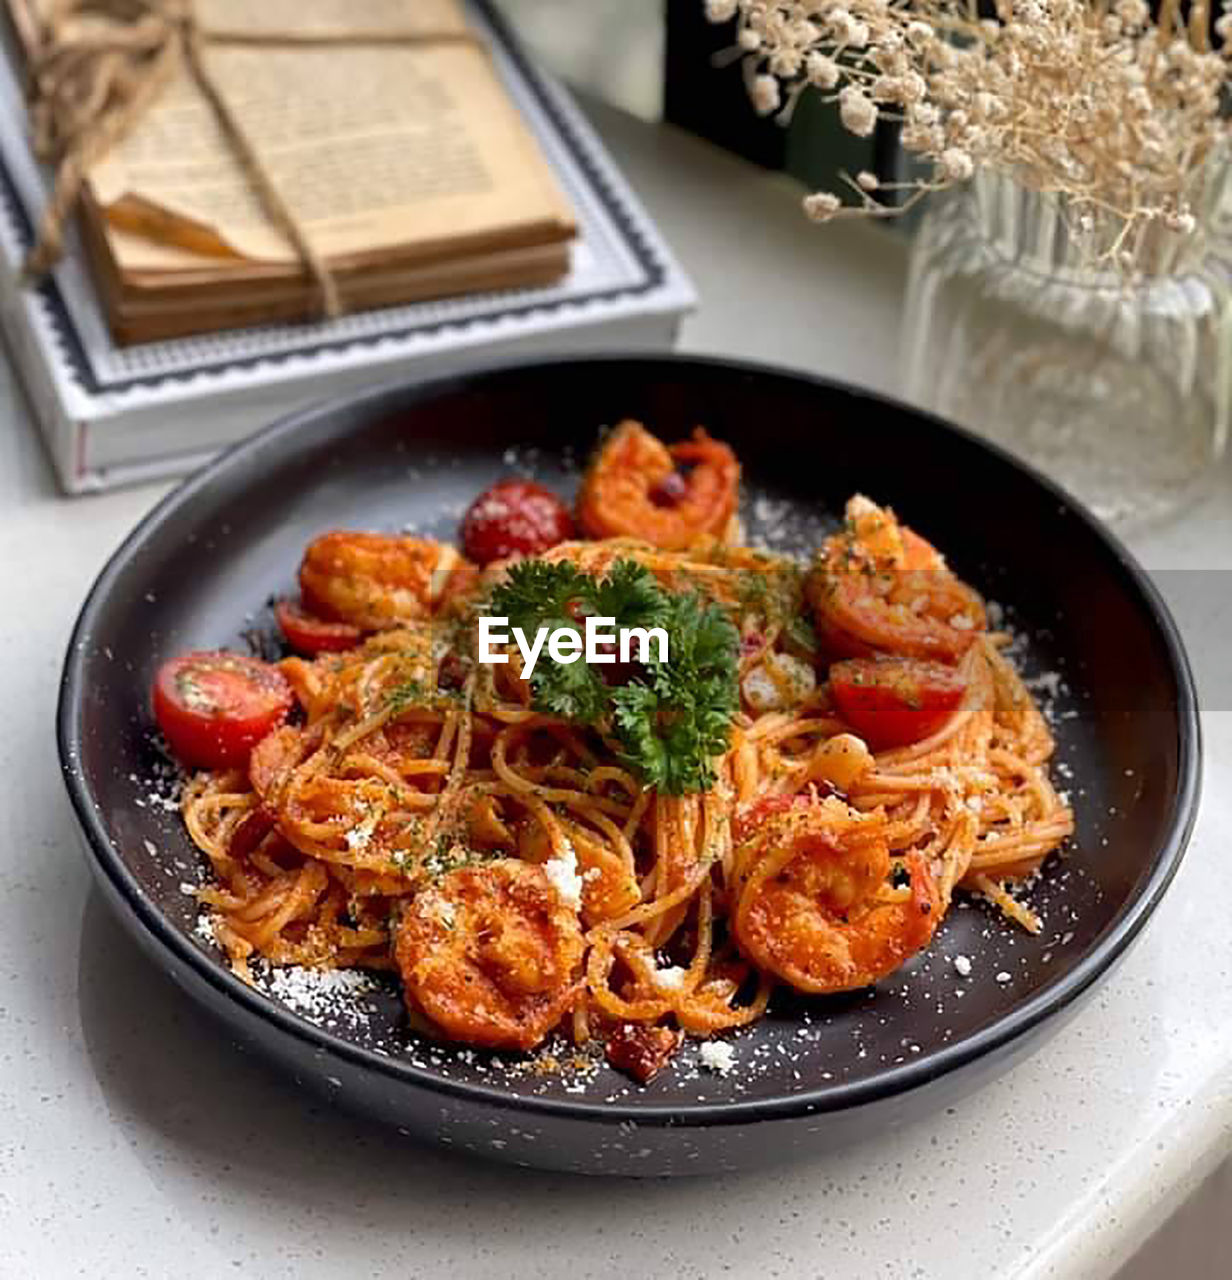 food, food and drink, spaghetti, dish, healthy eating, cuisine, freshness, meal, herb, italian food, plate, vegetable, wellbeing, pasta, no people, indoors, meat, shrimp, dinner, seafood, plant, table, savory food, fruit, spice, produce, crockery, bowl, asian food